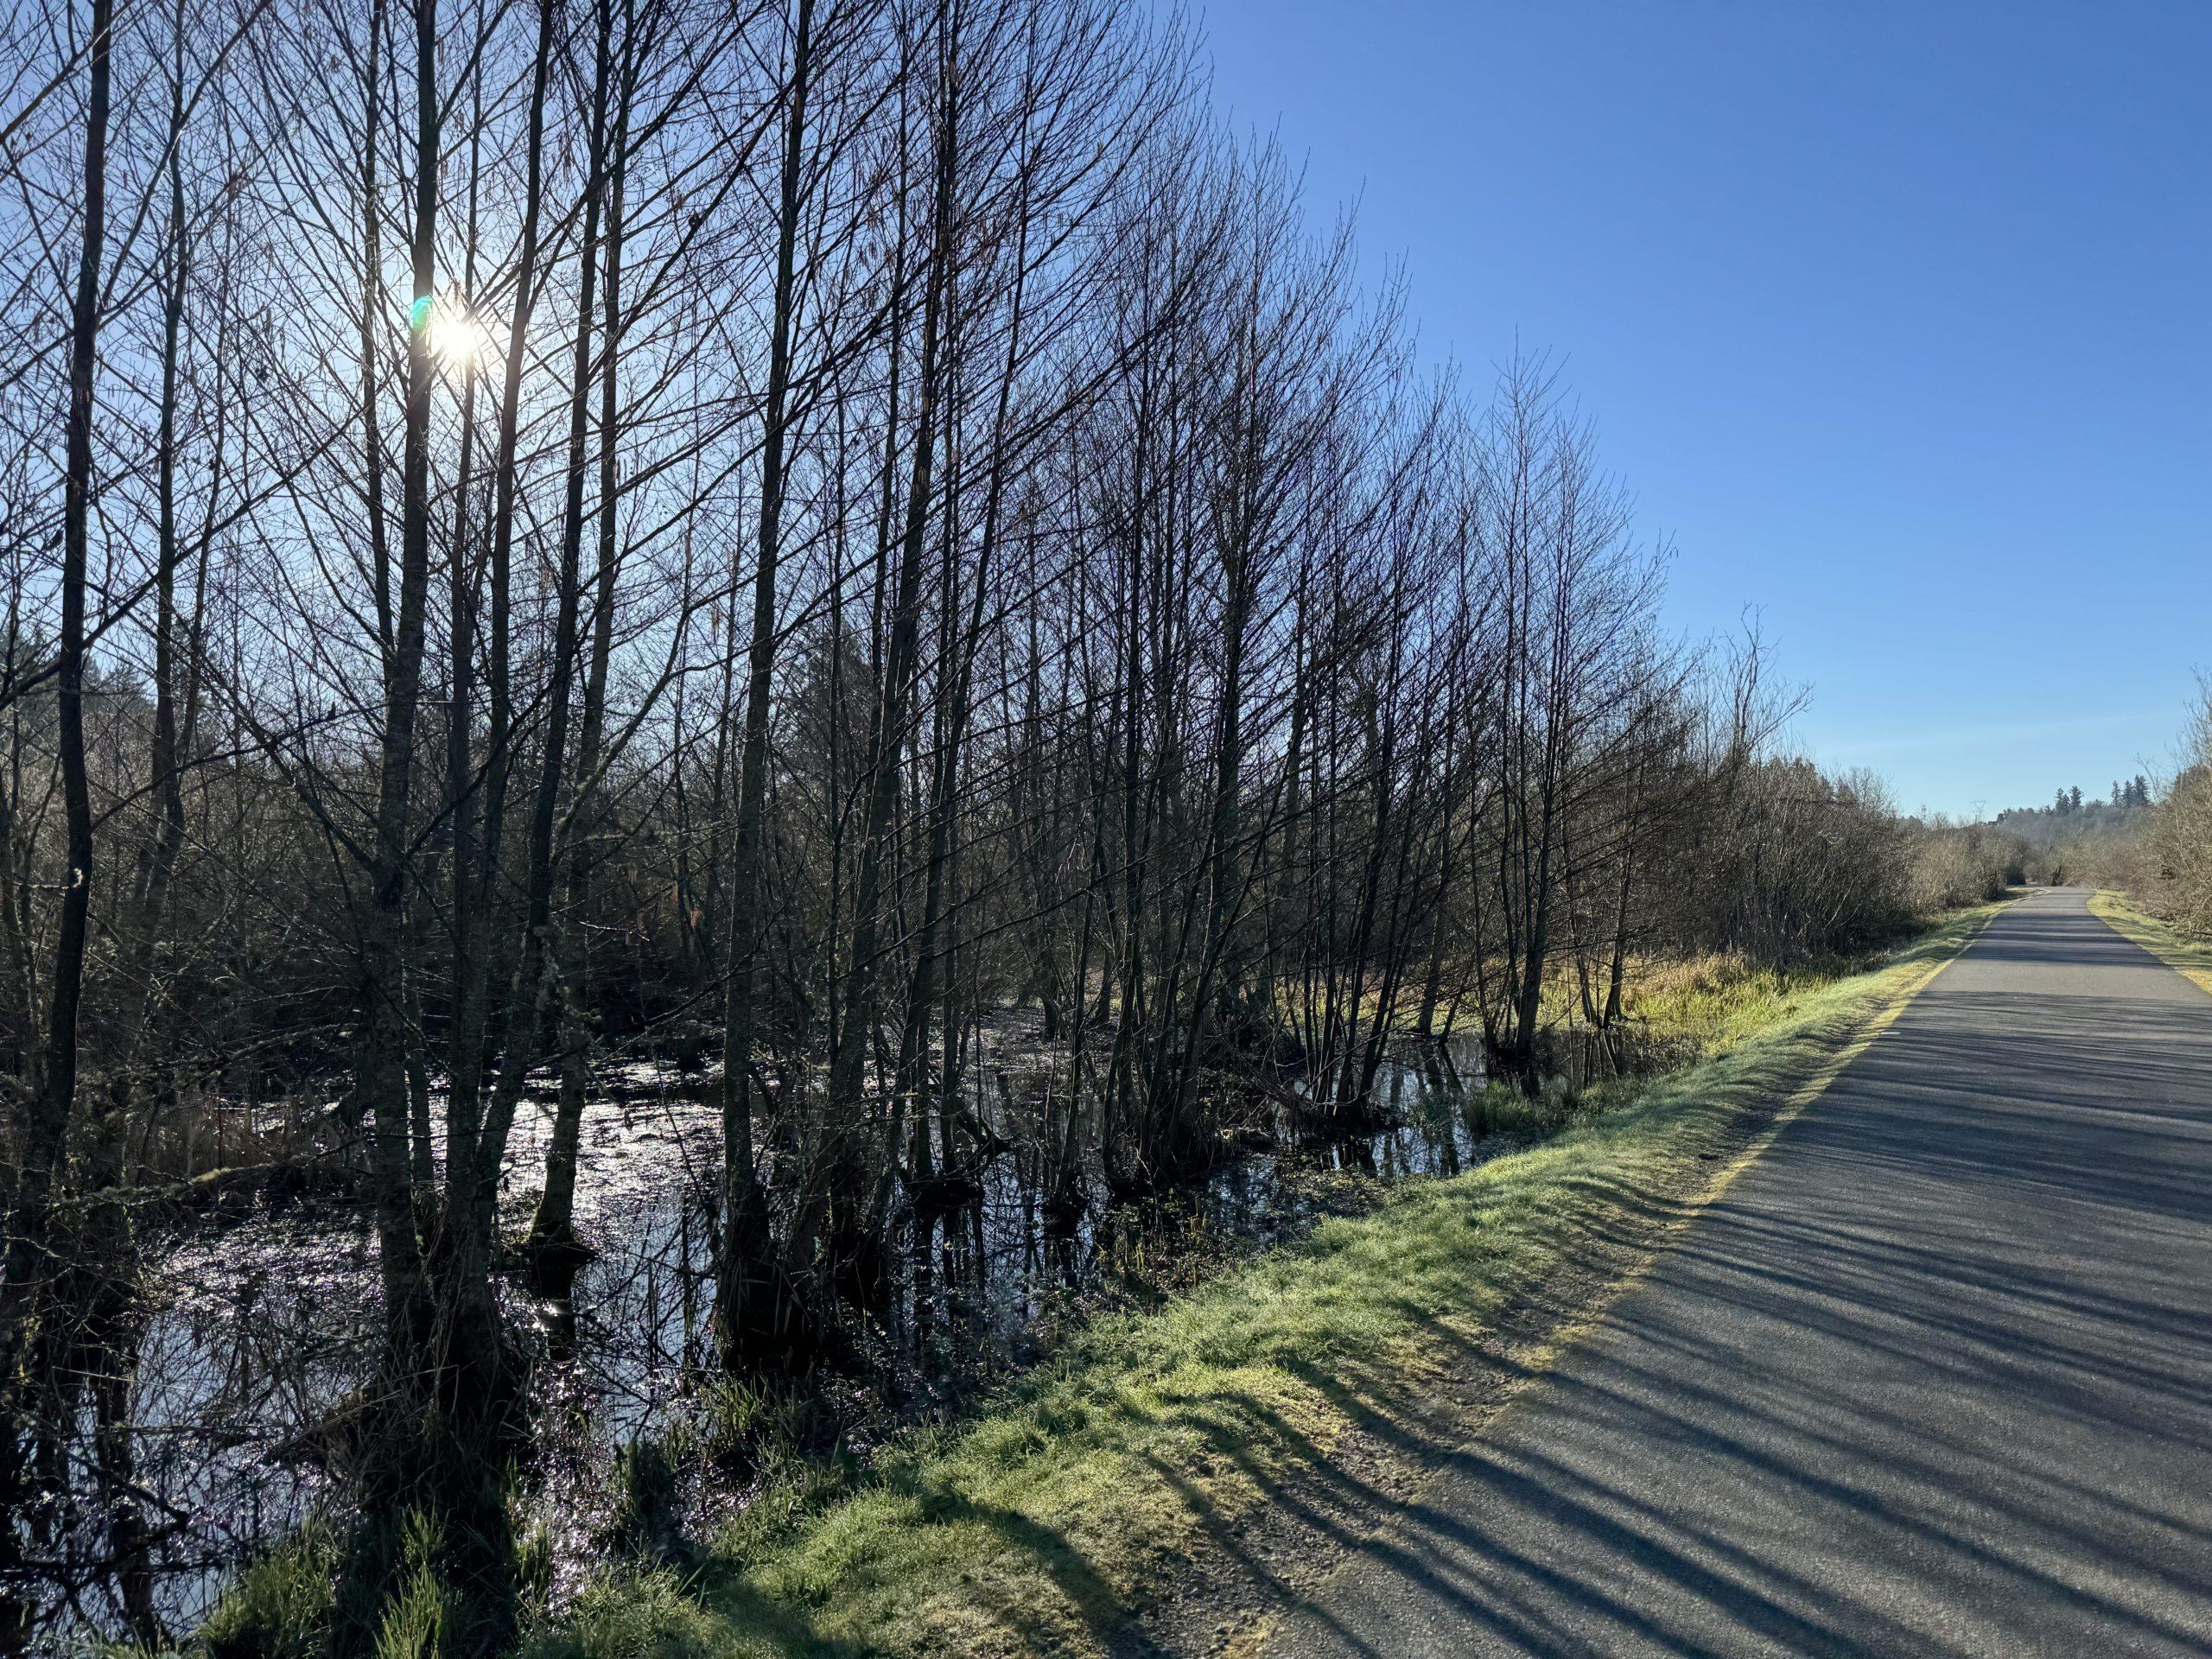 The sun shining through a line of bare trees growing out of marshland, casting shadows across the paved trail.